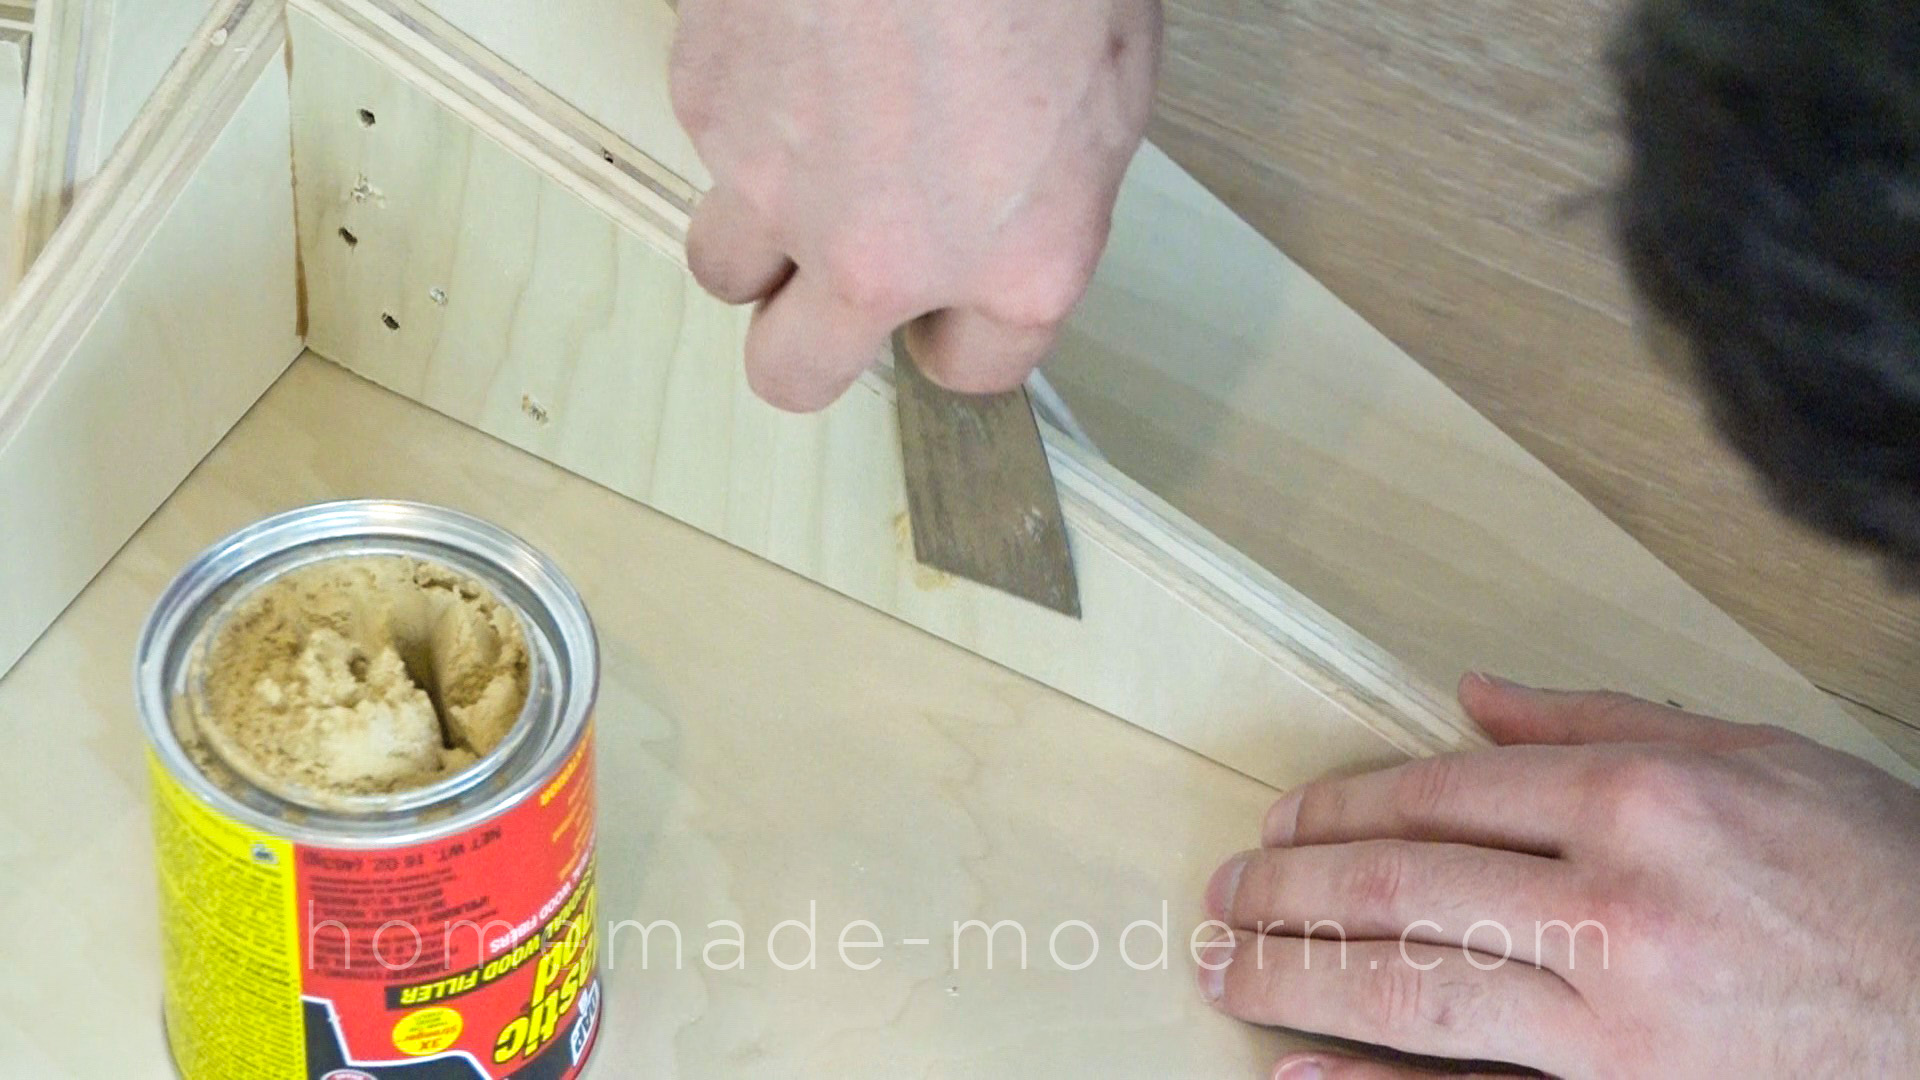 This DIY Plywood table is made out ¾” plywood from  Home Depot and does NOT require a CNC machine to make. Full instructions can be found at HomeMade-Modern.com